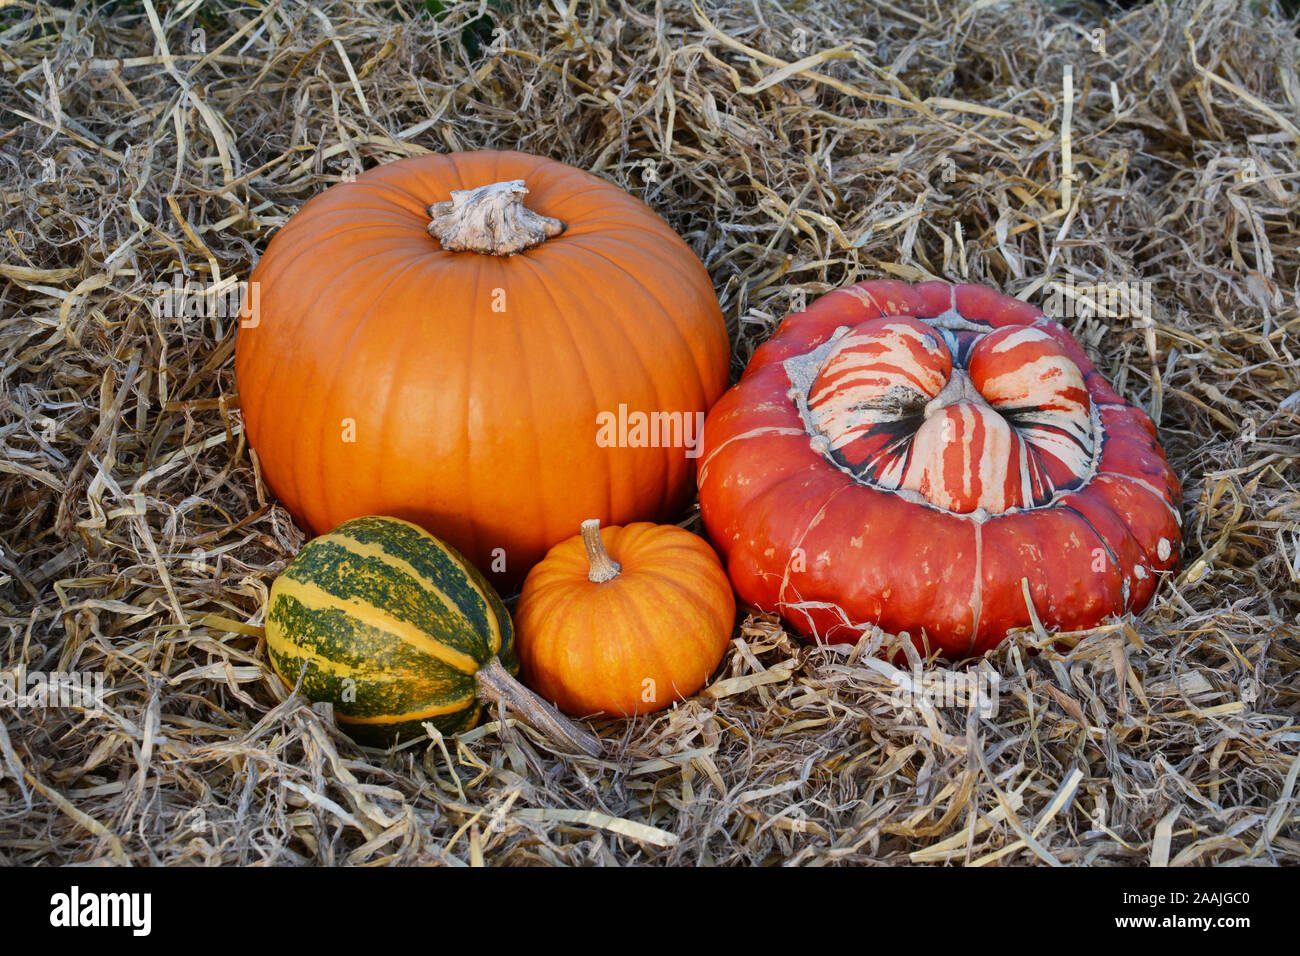 Fall gourds and squashes with orange pumpkins in an arrangement on fresh straw Stock Photo